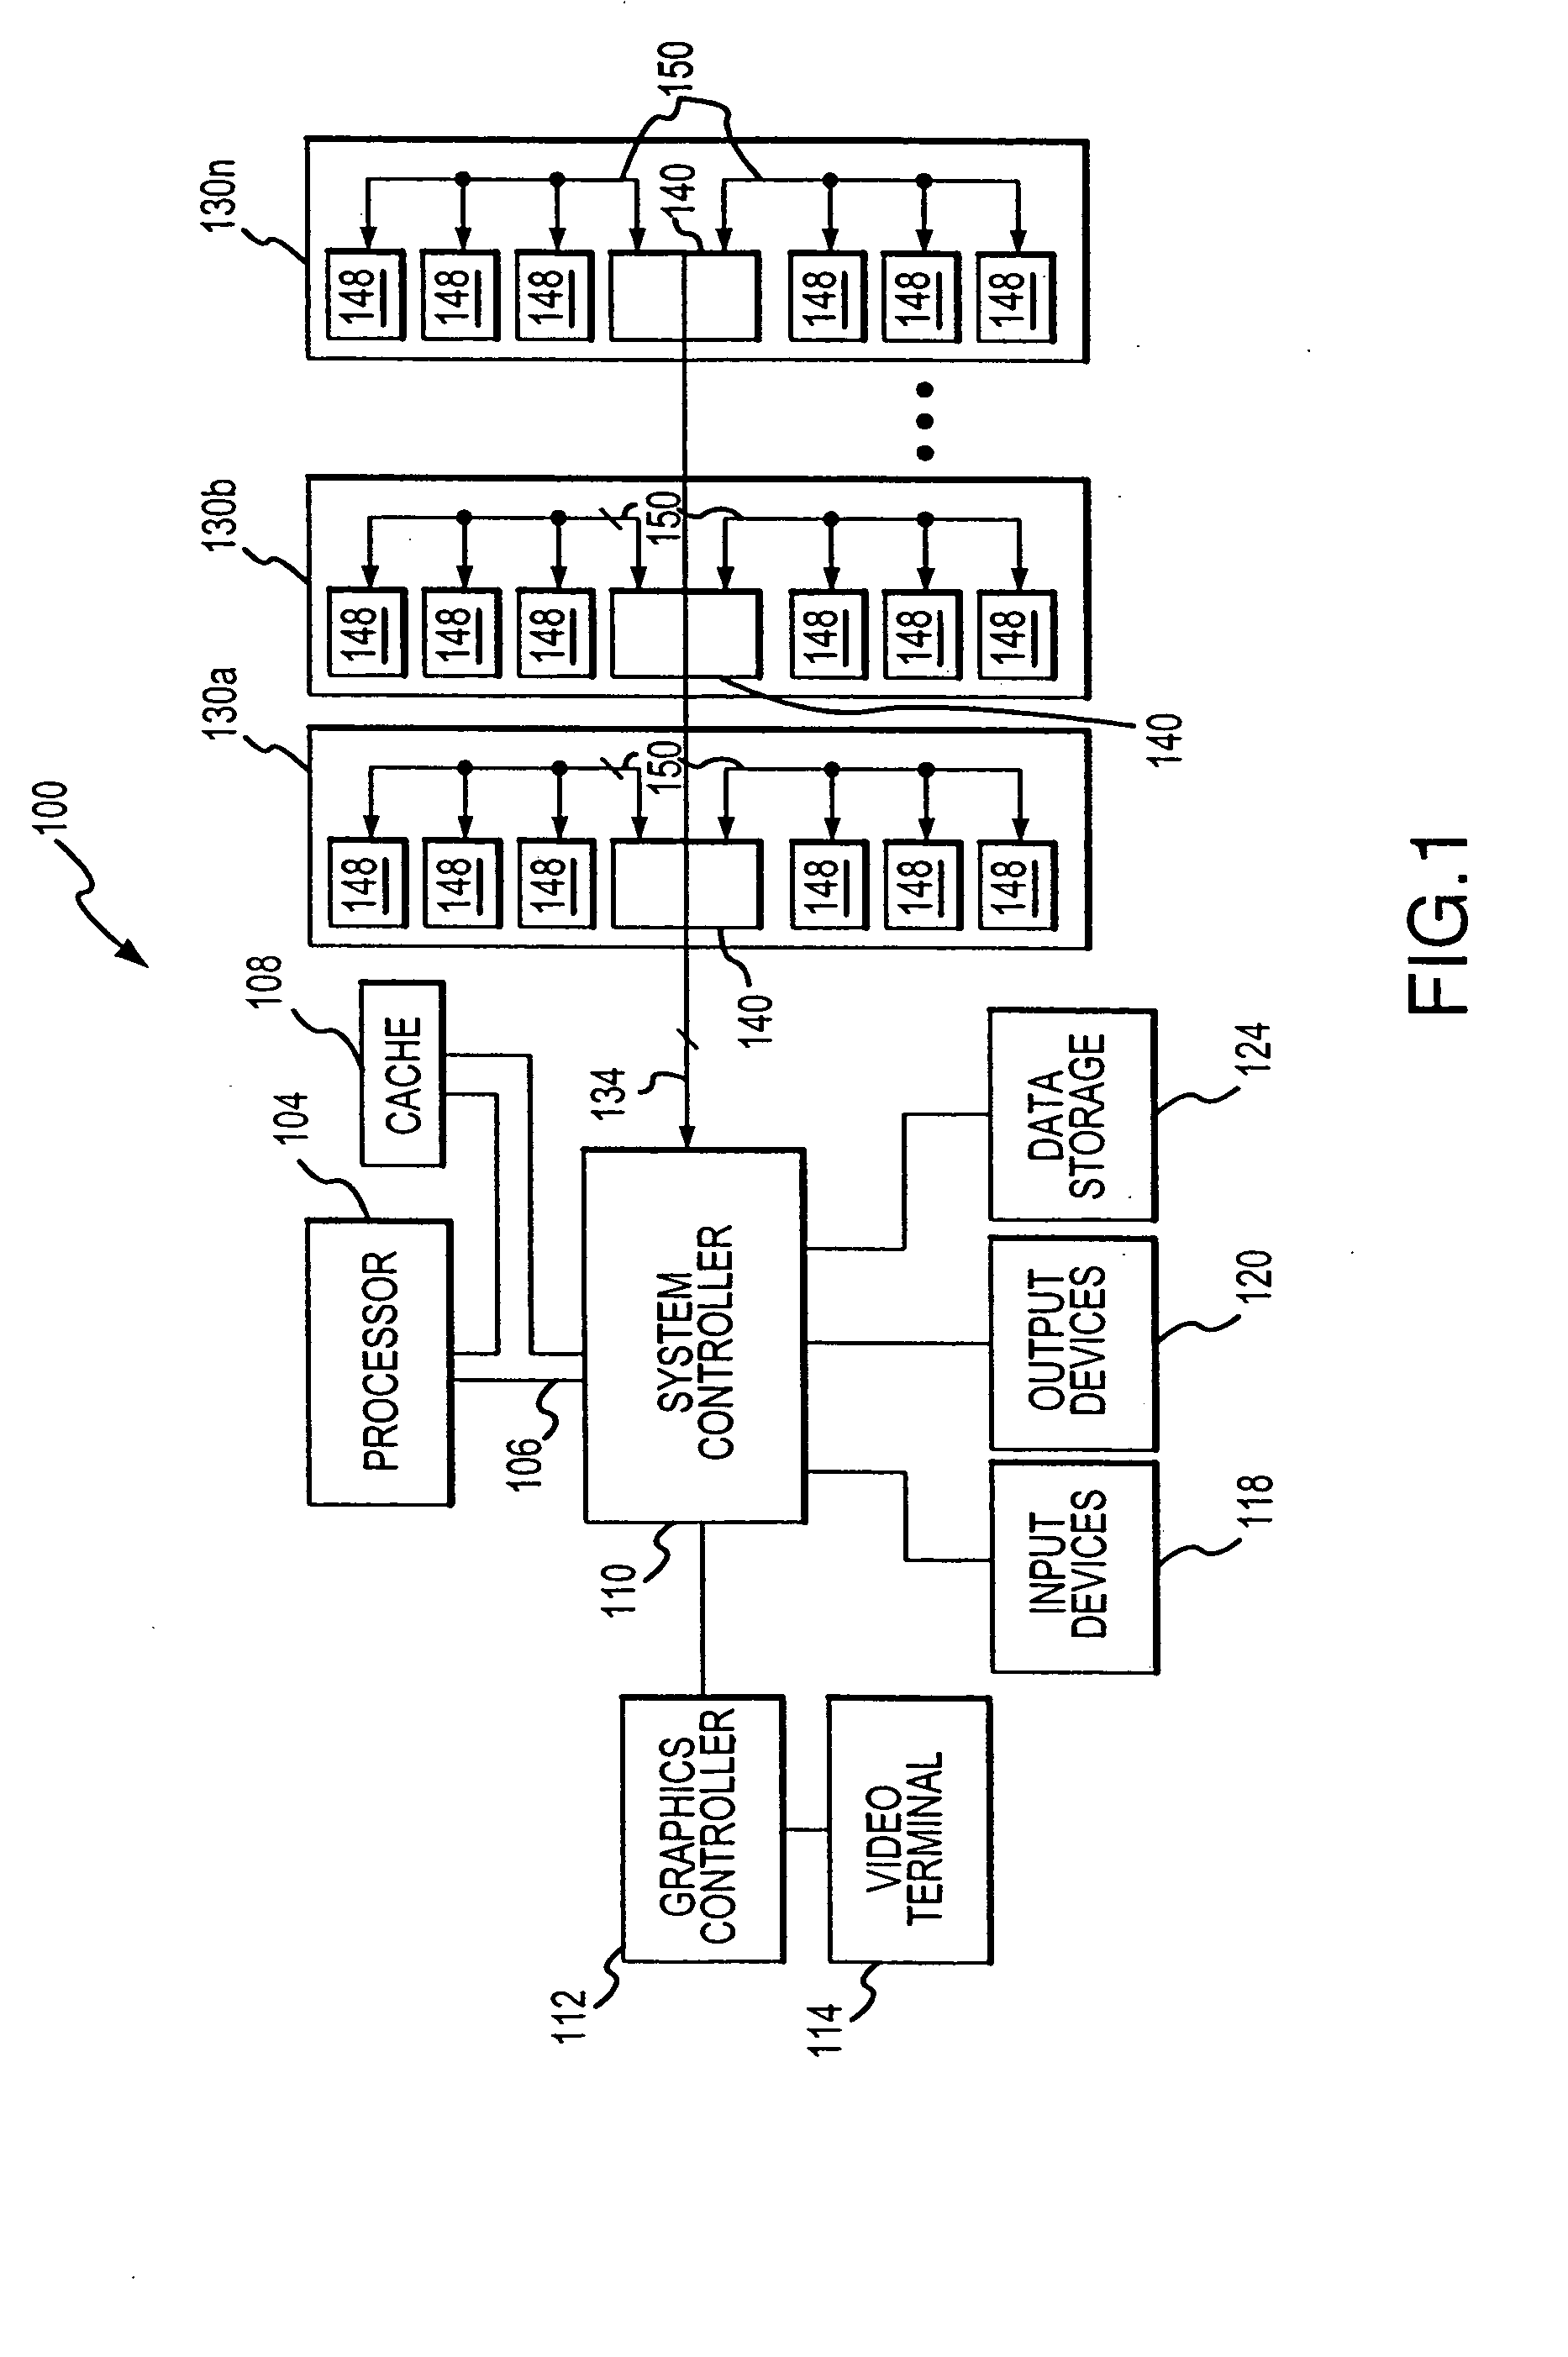 Method and system for controlling memory accesses to memory modules having a memory hub architecture